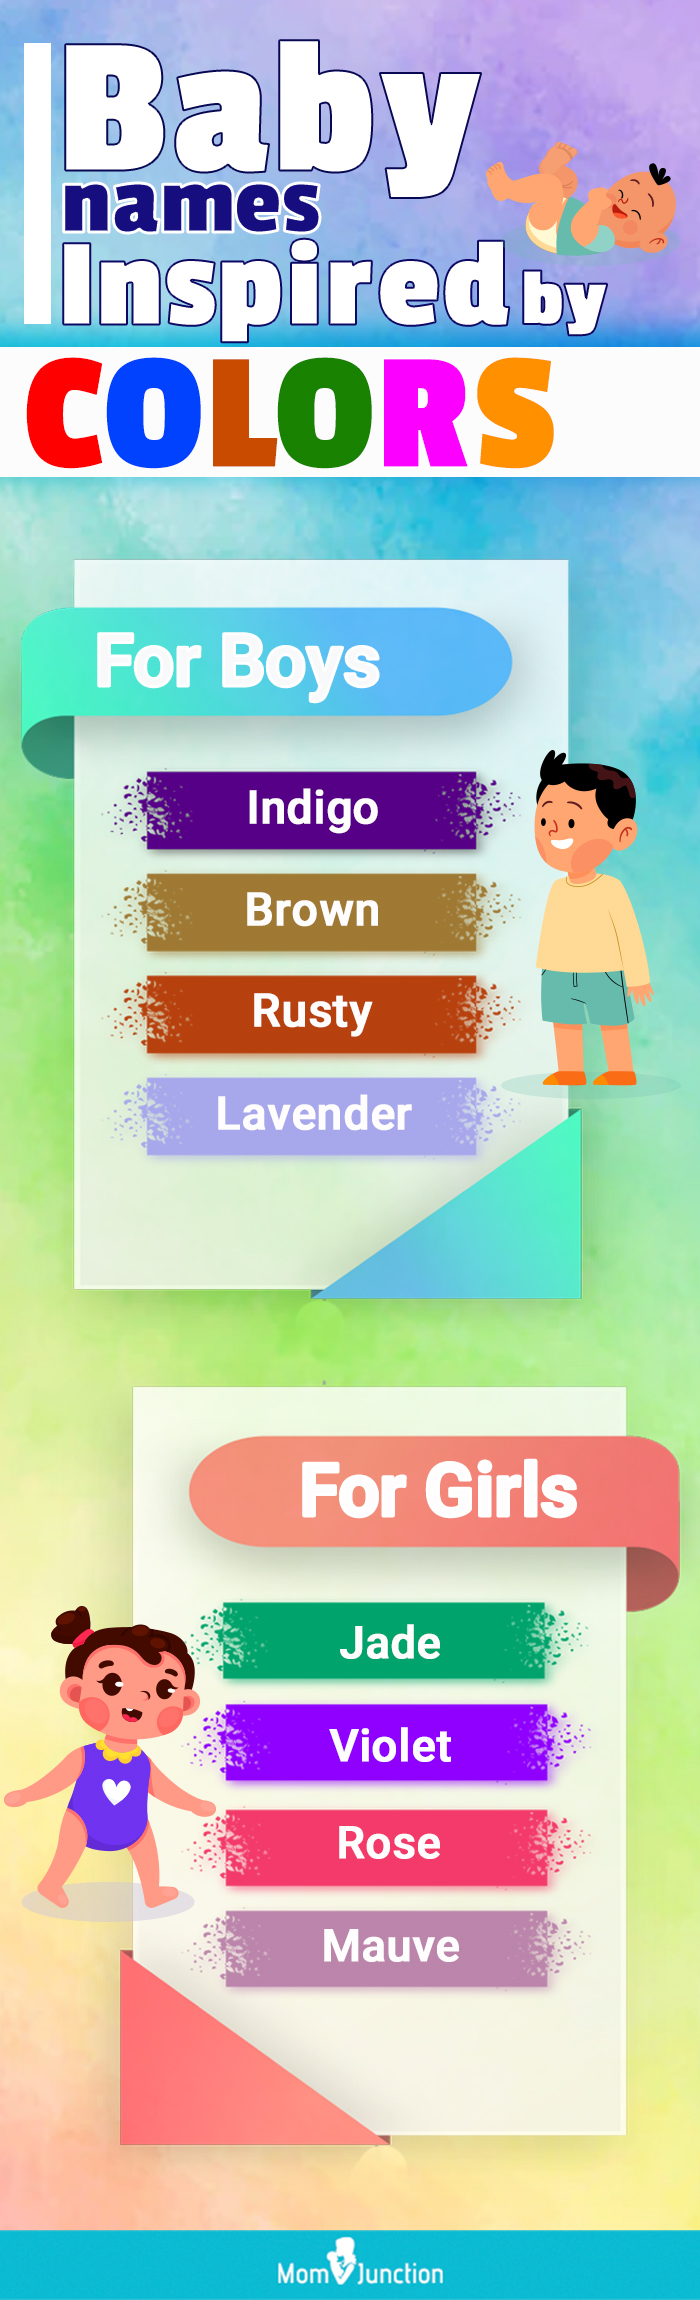 baby name inspired by colors (infographic)